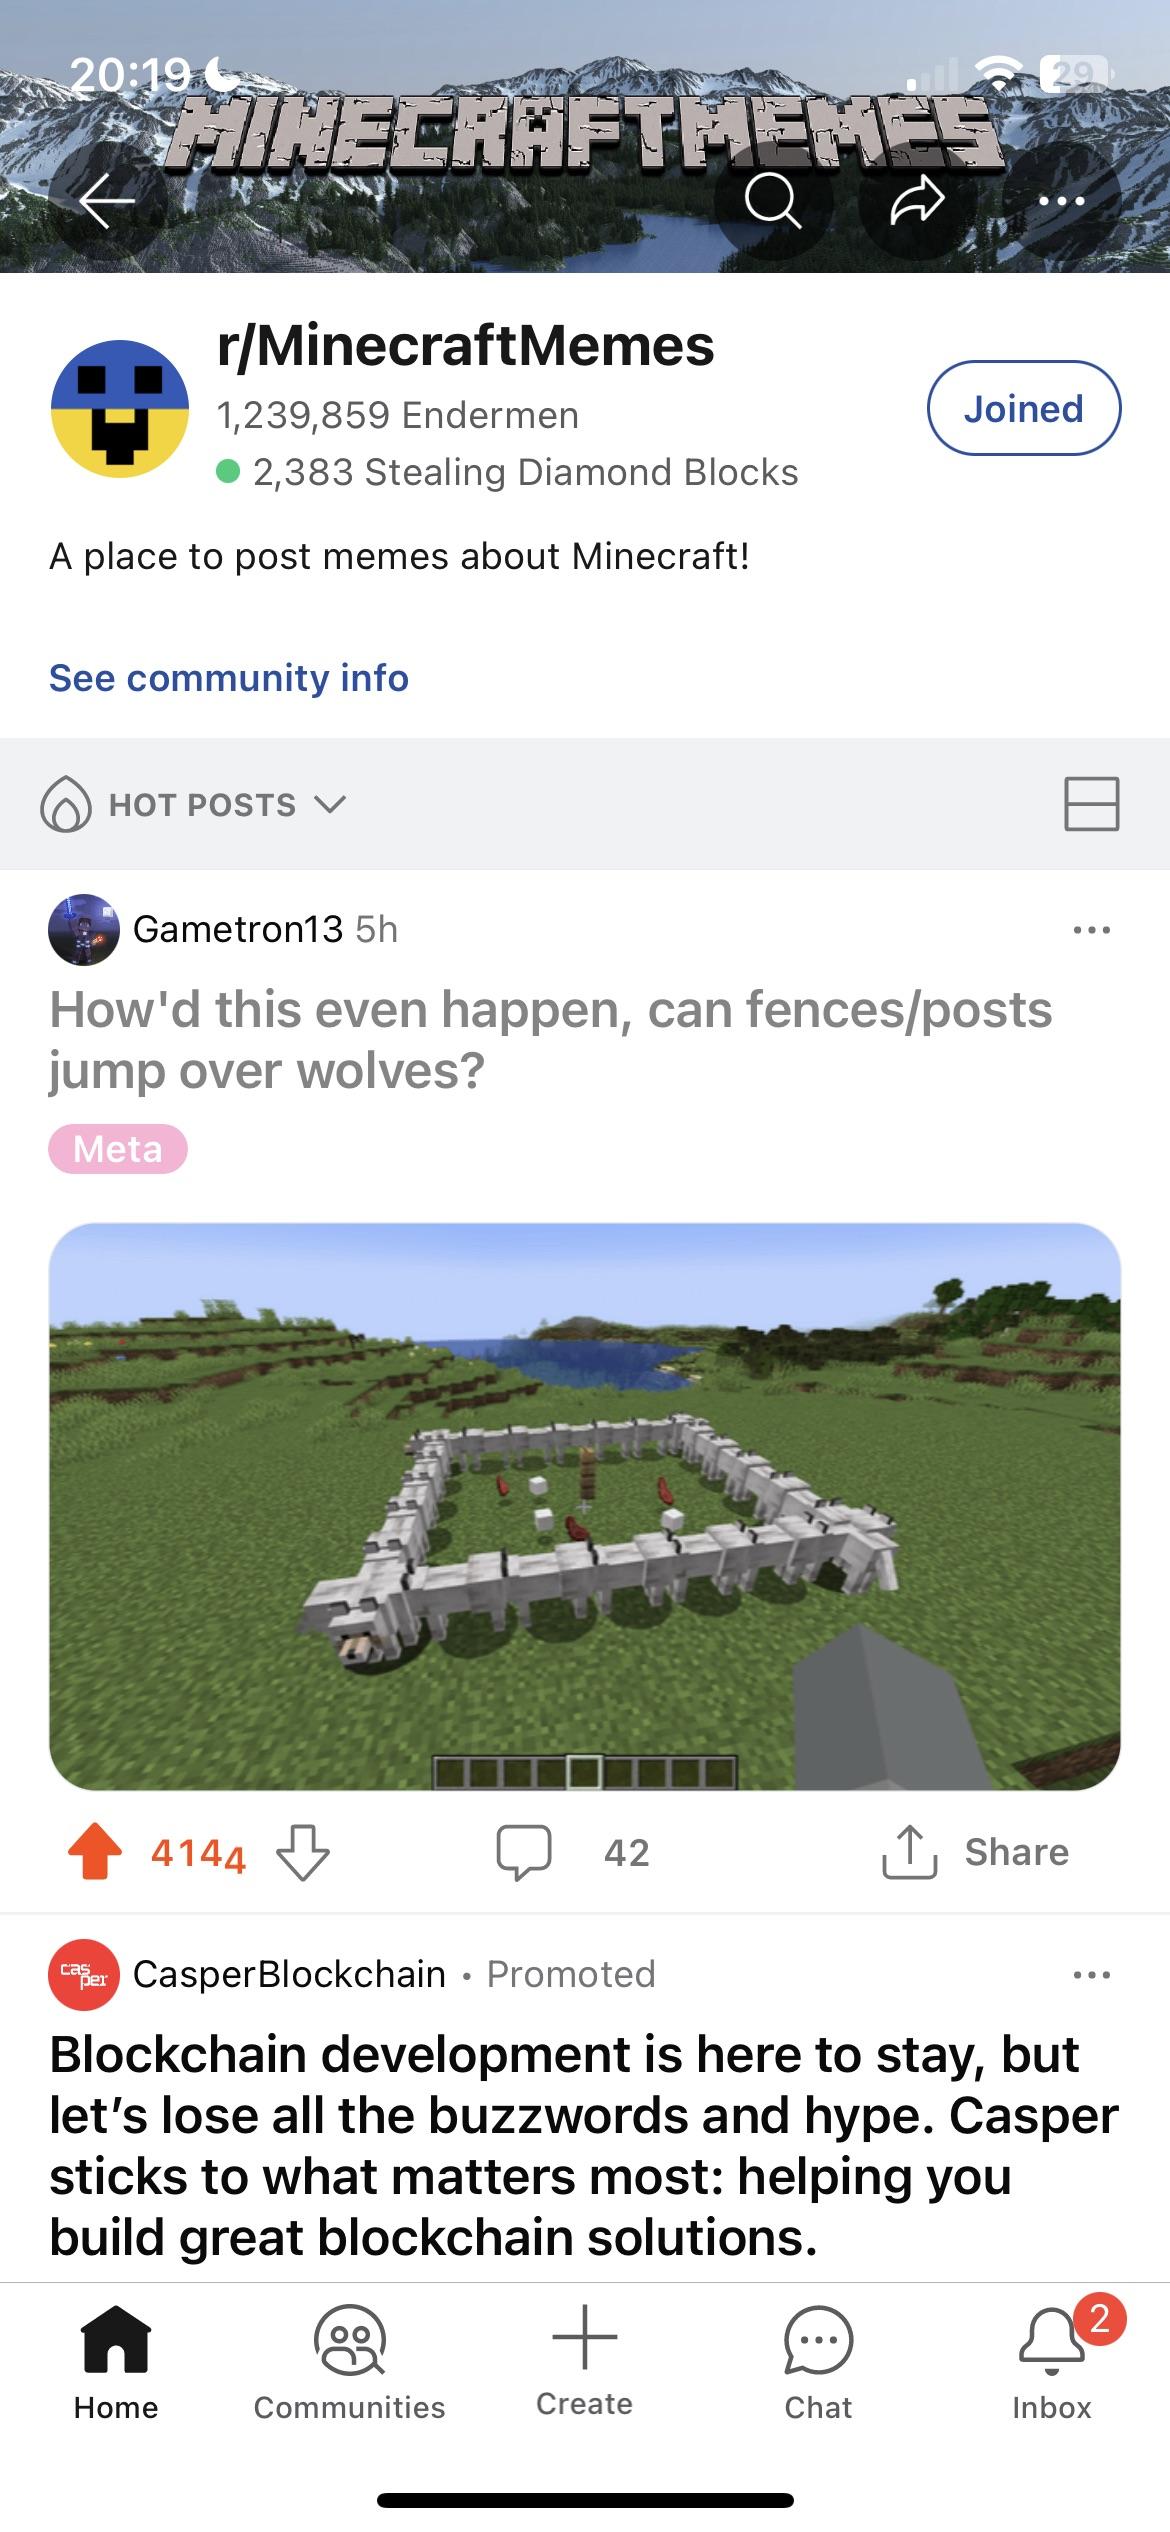 Minecraft Memes - "Fences and posts defying wolves?"